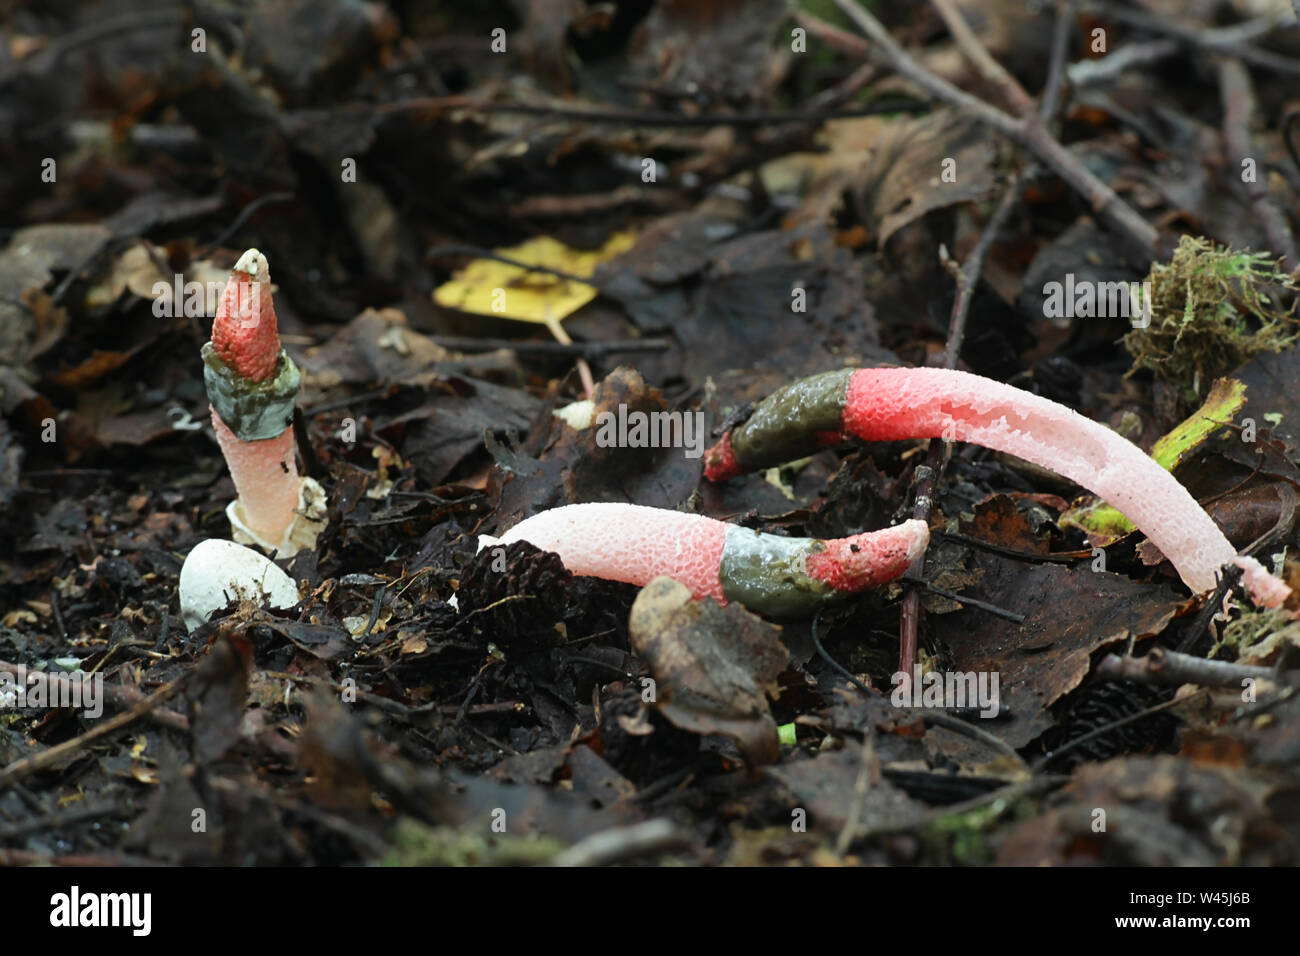 Mutinus ravenelii, known as the Red Stinkhorn, wild fungus from Finland Stock Photo